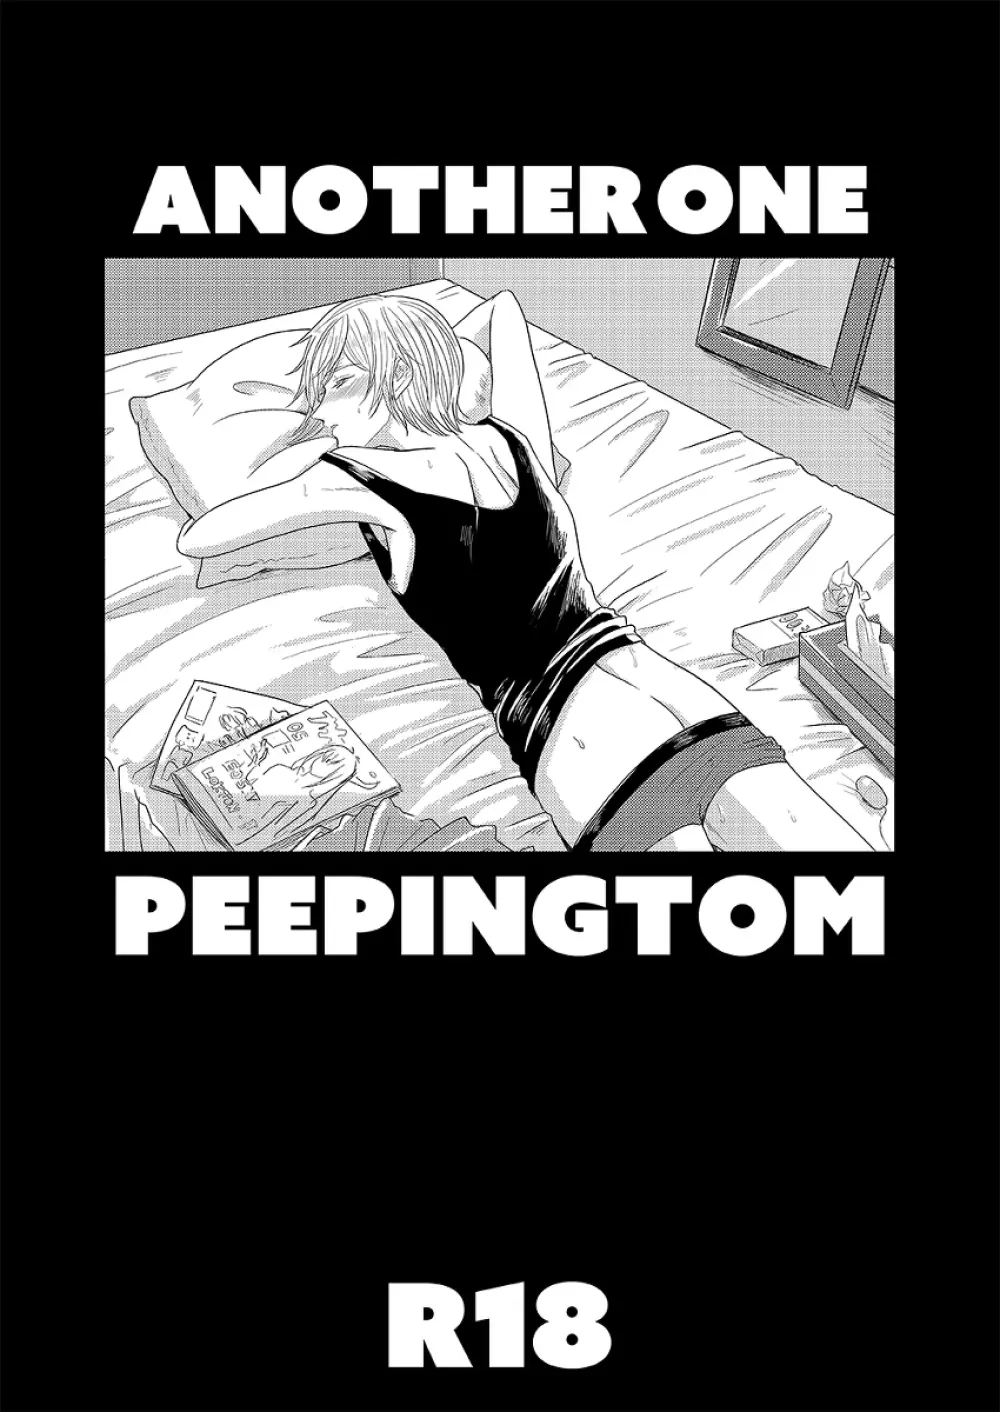 ANOTHER ONE PEEPING TOM - page1